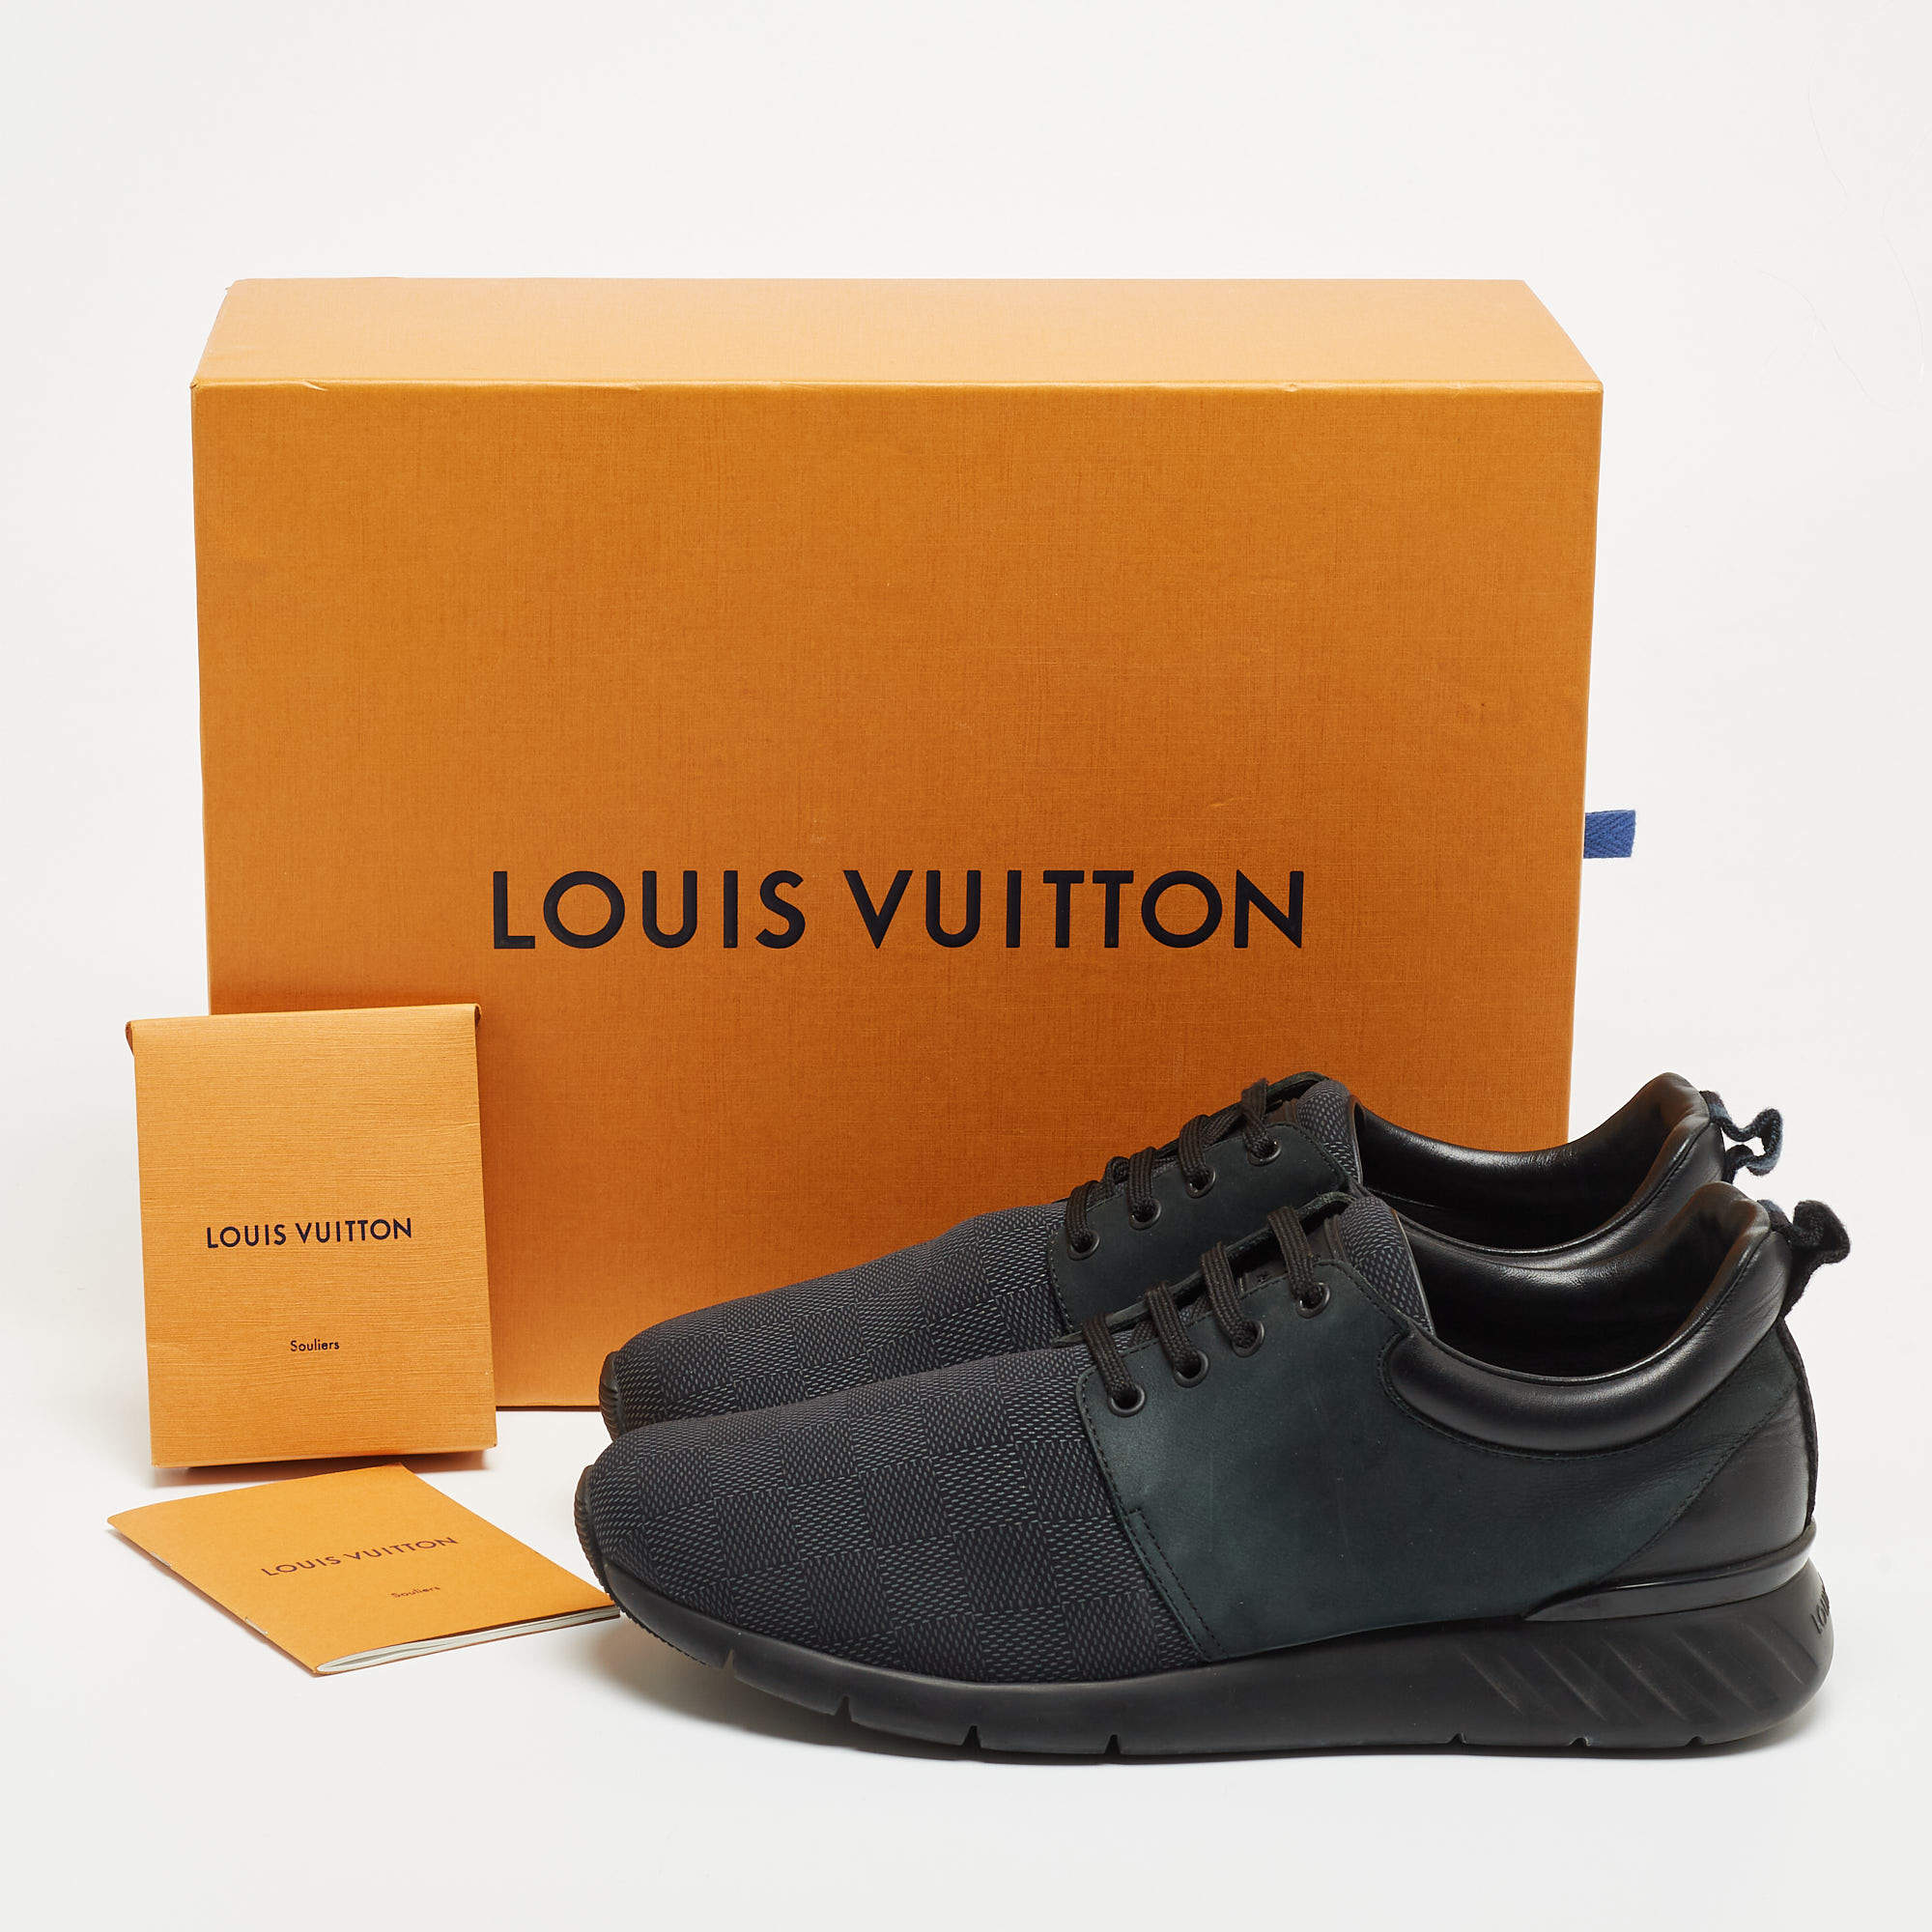 Louis Vuitton Fastlane Sneakers in Black Nylon and Leather ref